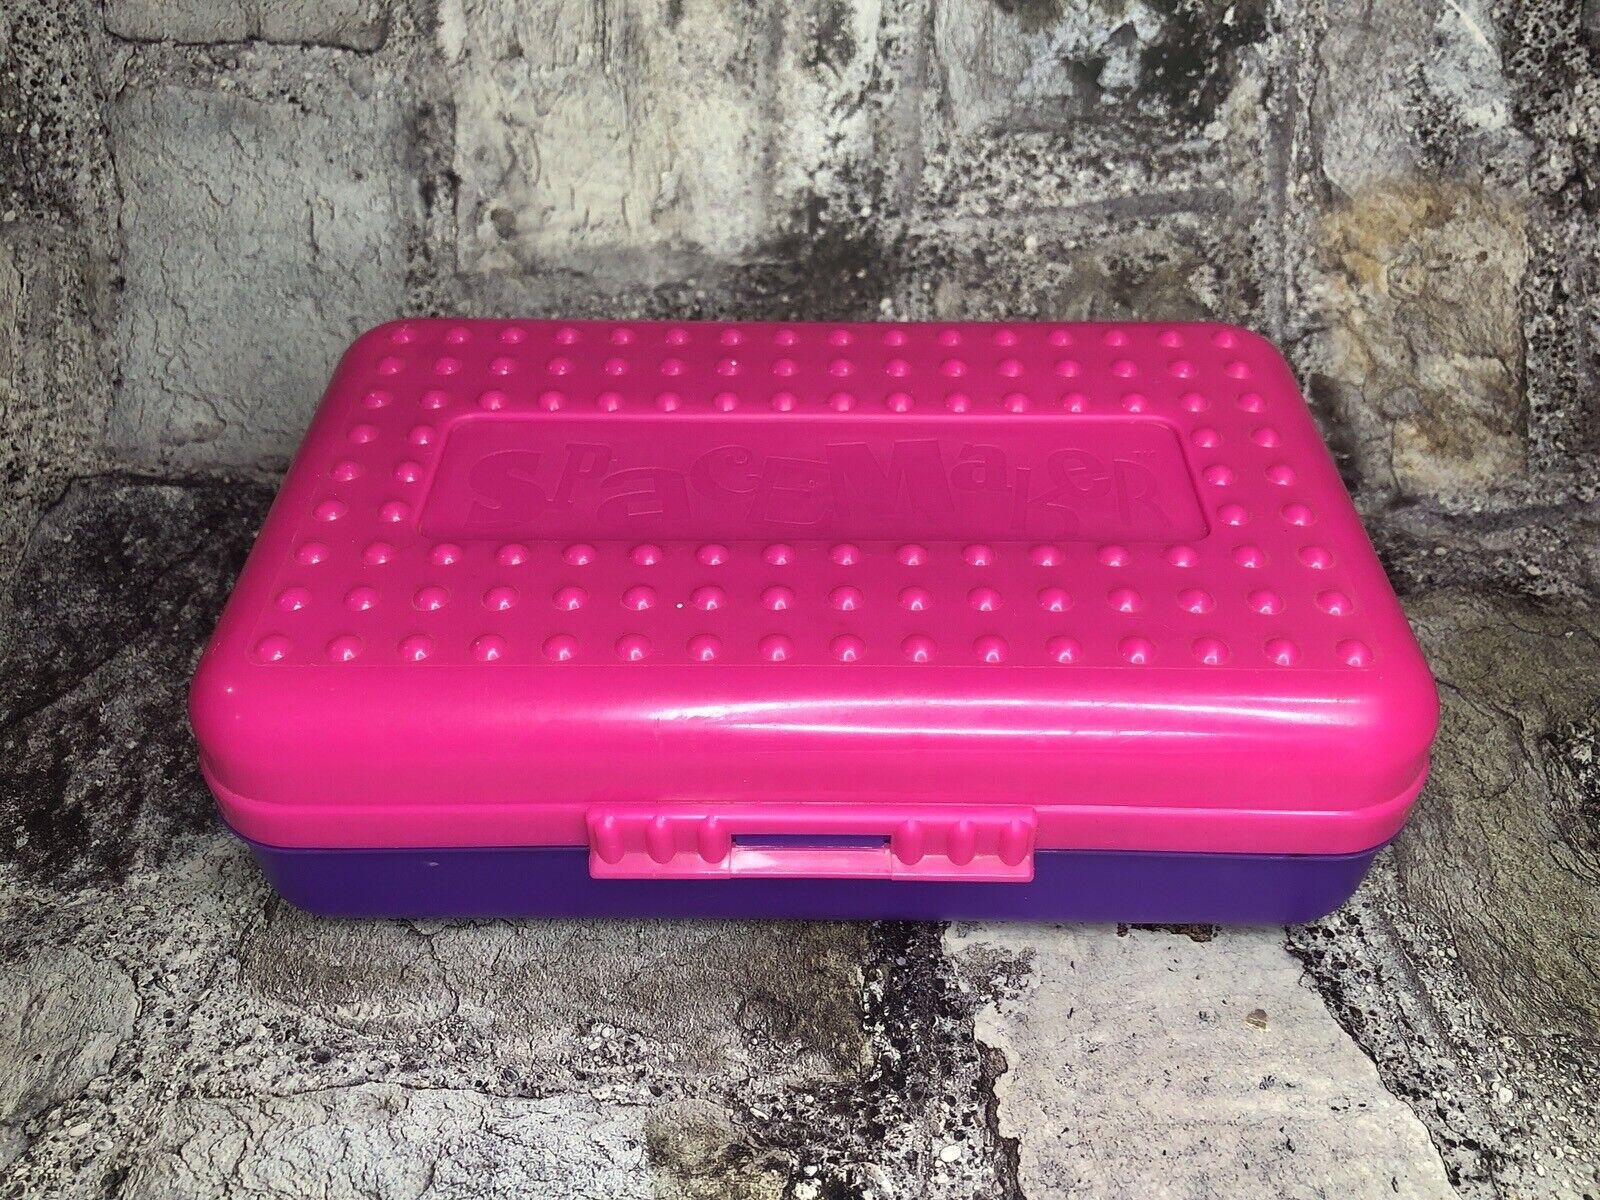 Rare Vintage 90s Spacemaker Pencil Case Box 8x5 Pink & Purple Made in USA